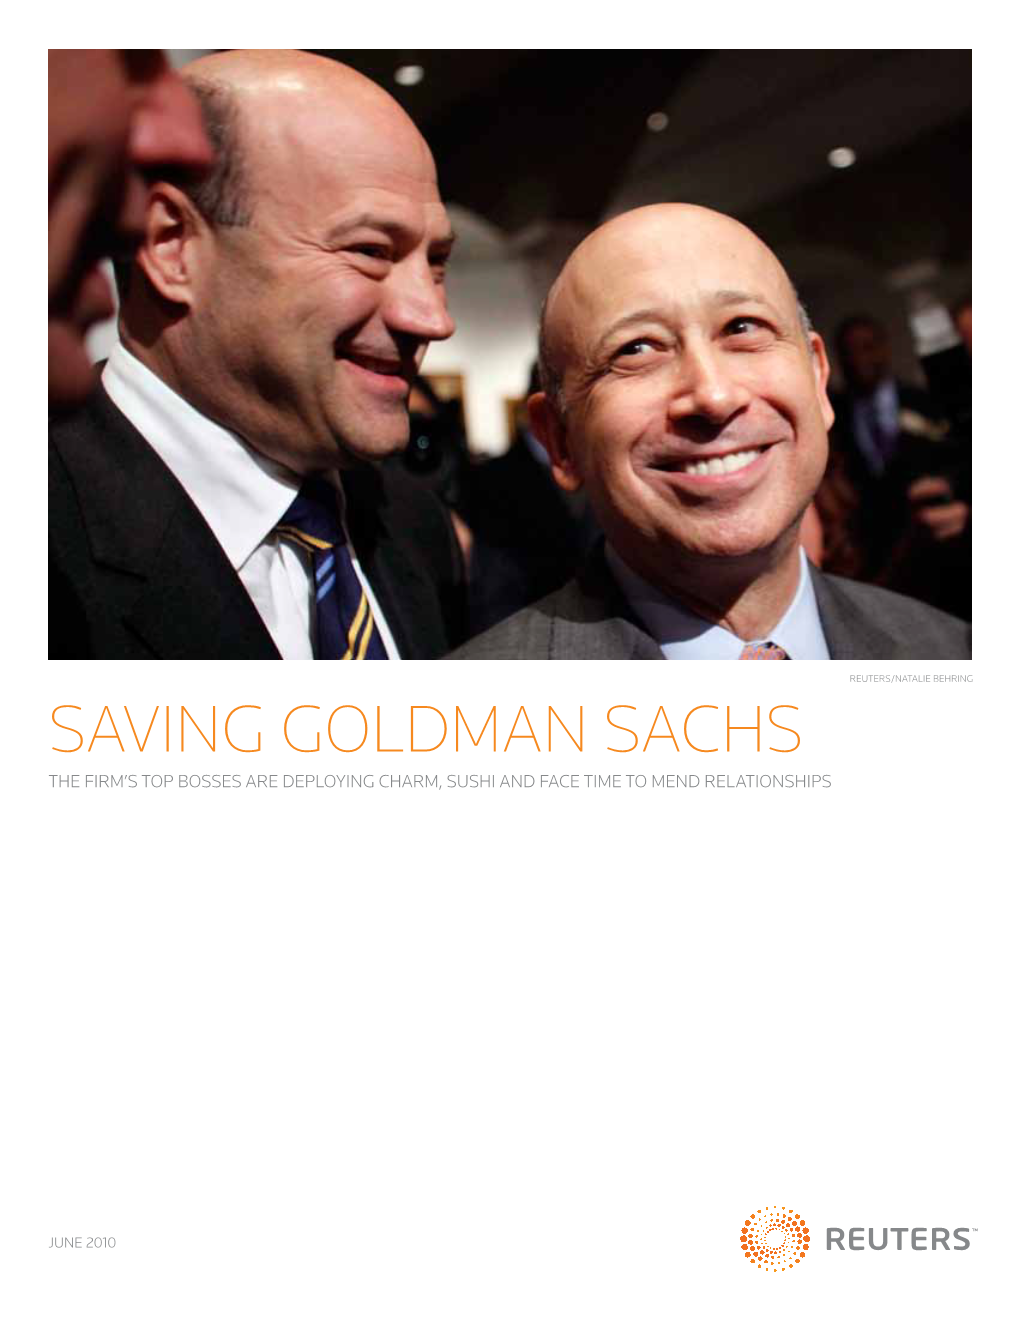 Saving Goldman Sachs the Firm’S Top Bosses Are Deploying Charm, Sushi and Face Time to Mend Relationships